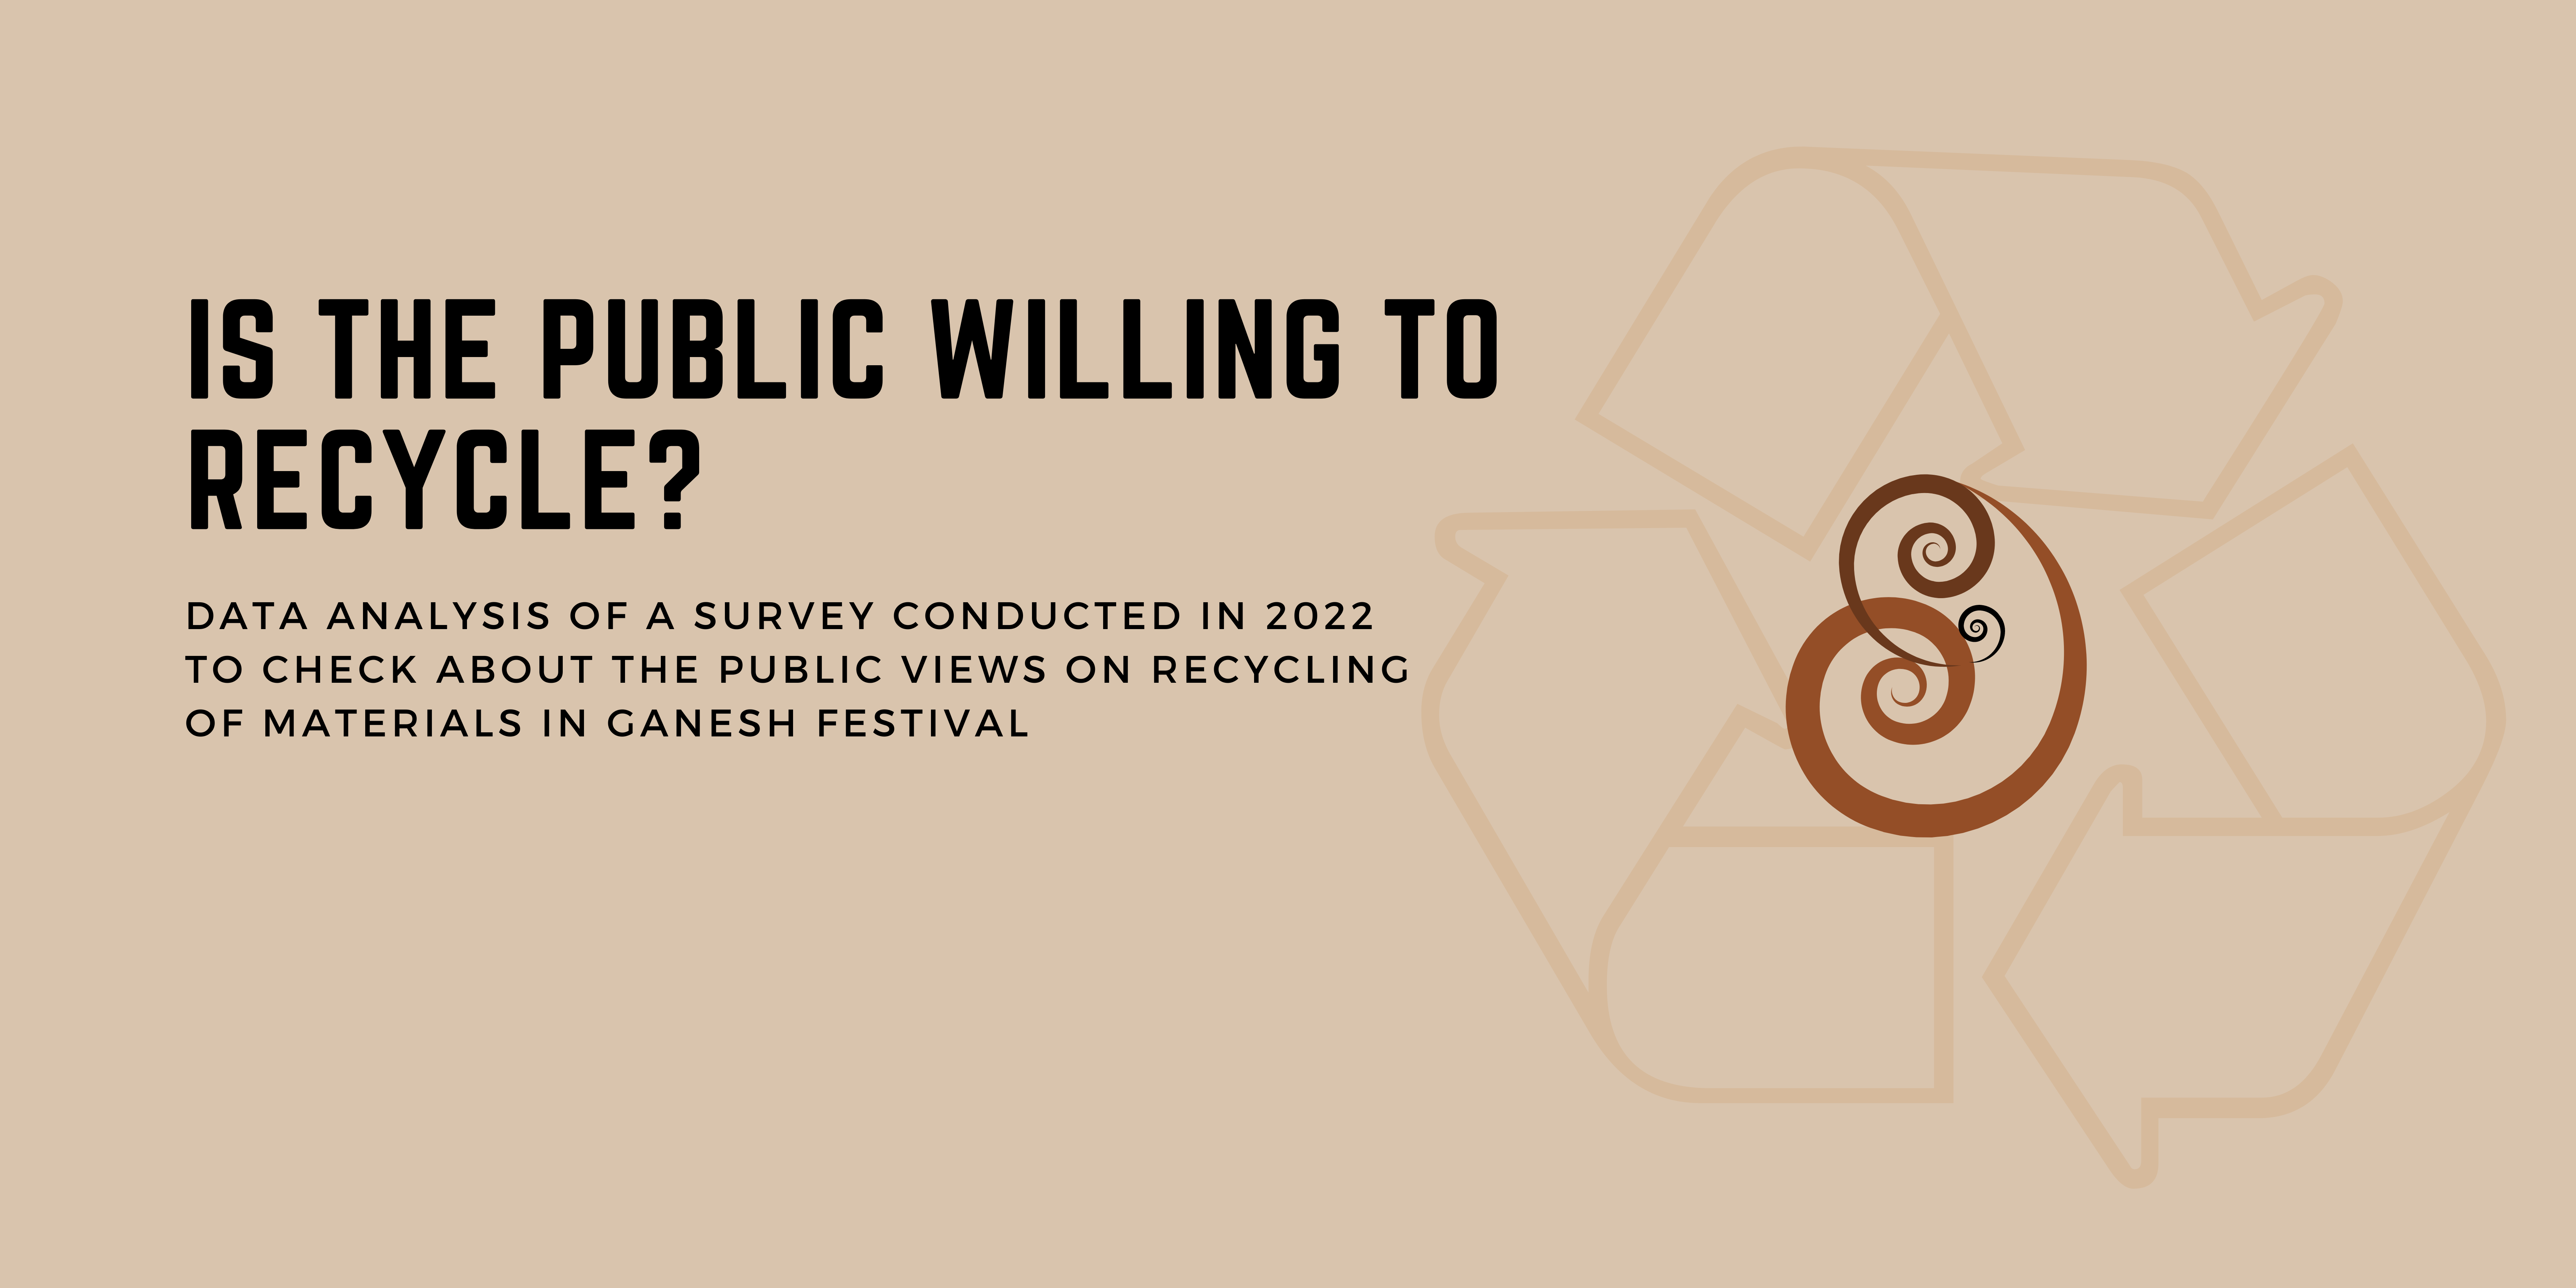 NEW ! Data analysis of a survey done to gauge public awareness and willingness to recycle in 2022 Click on the image to read the results. 